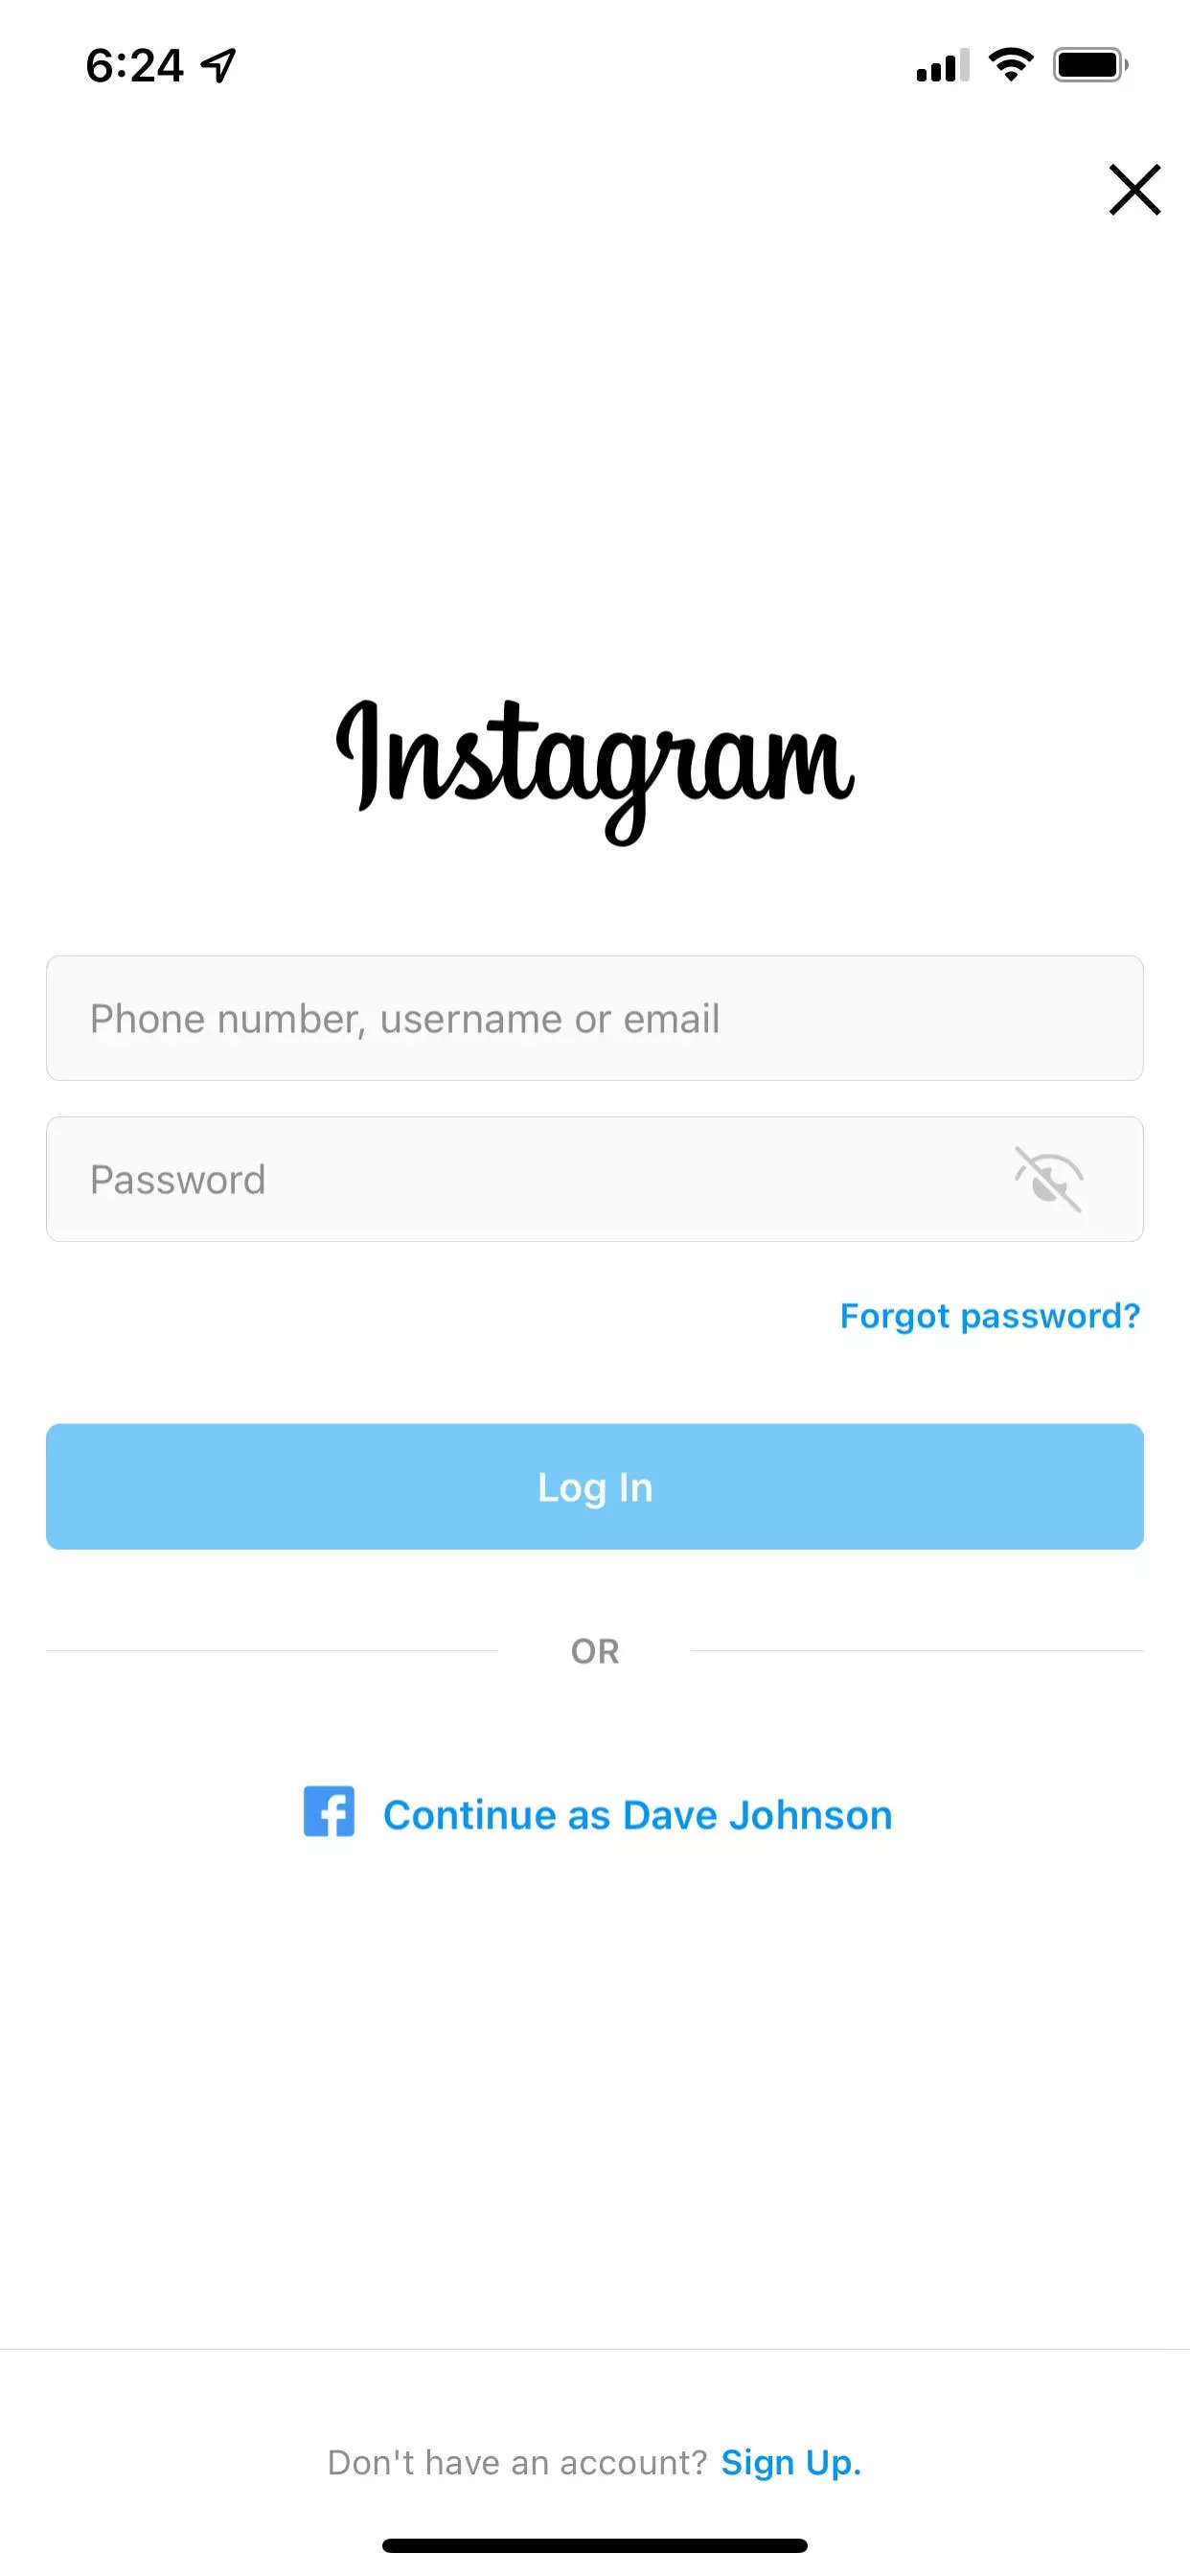 [Instagram-login - The Instagram login page on an iPhone.]